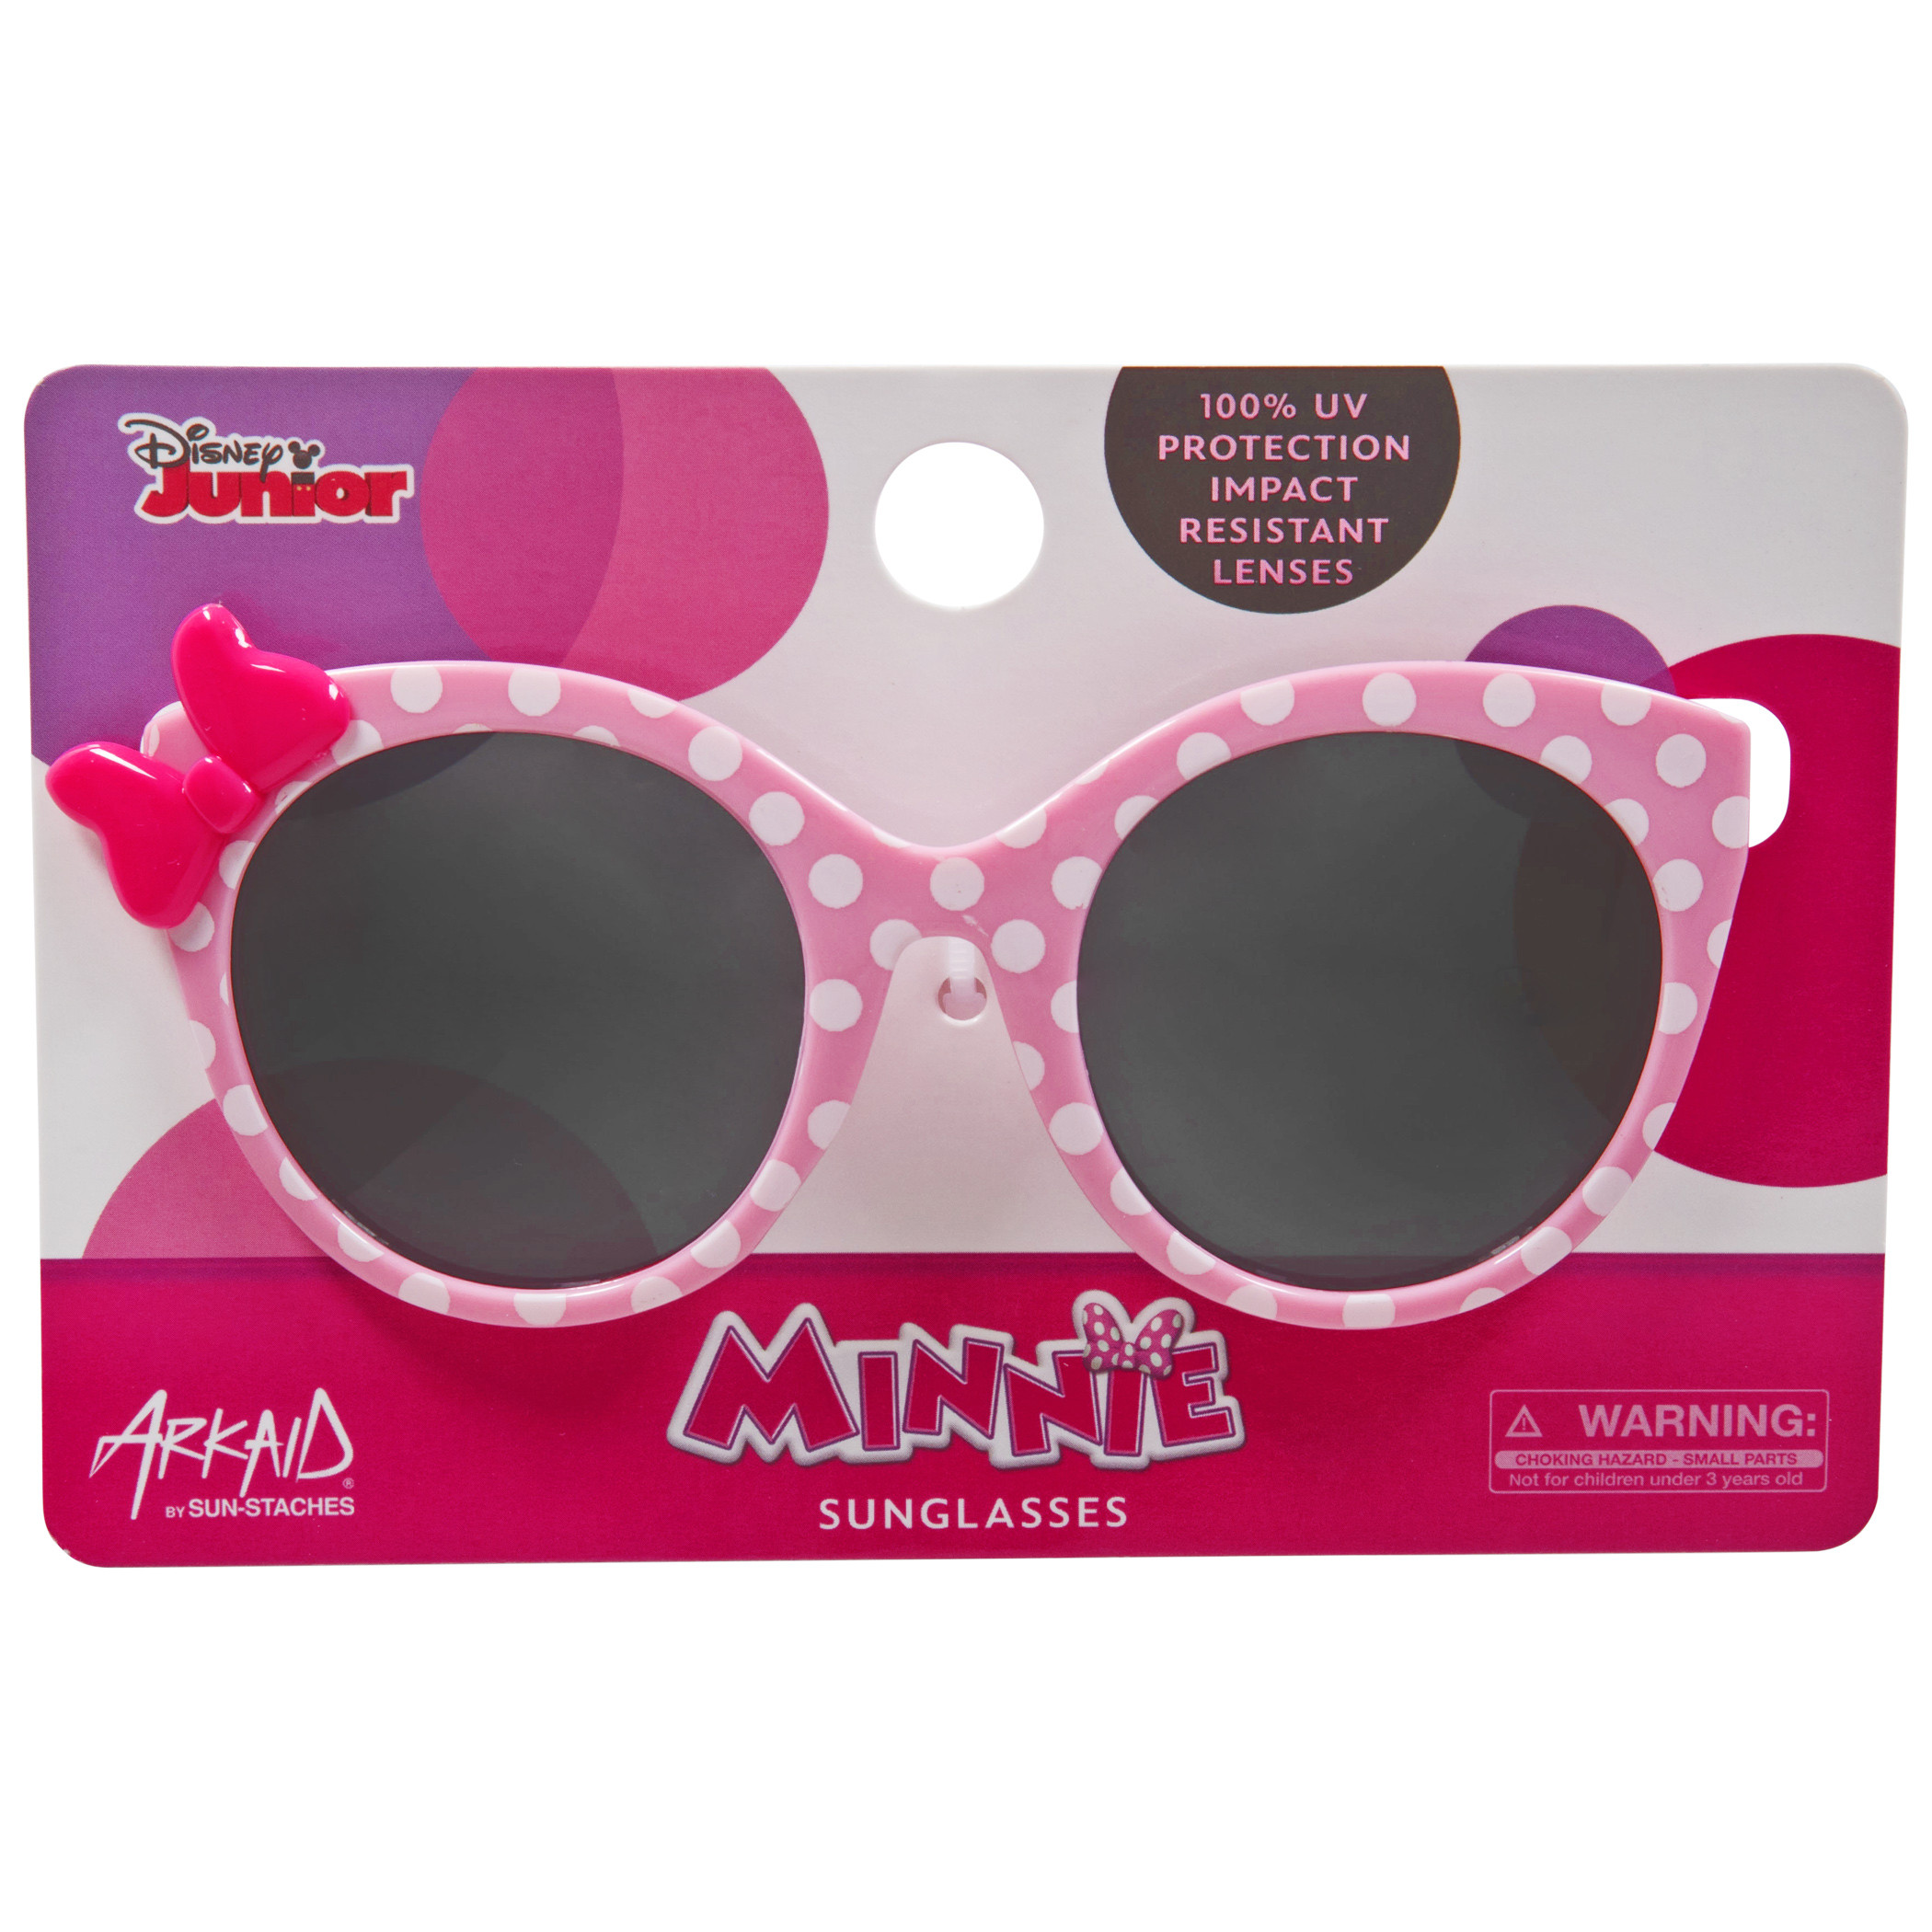 Disney Minnie Mouse Bright Polka Dot Kid's Sunglasses with Bow